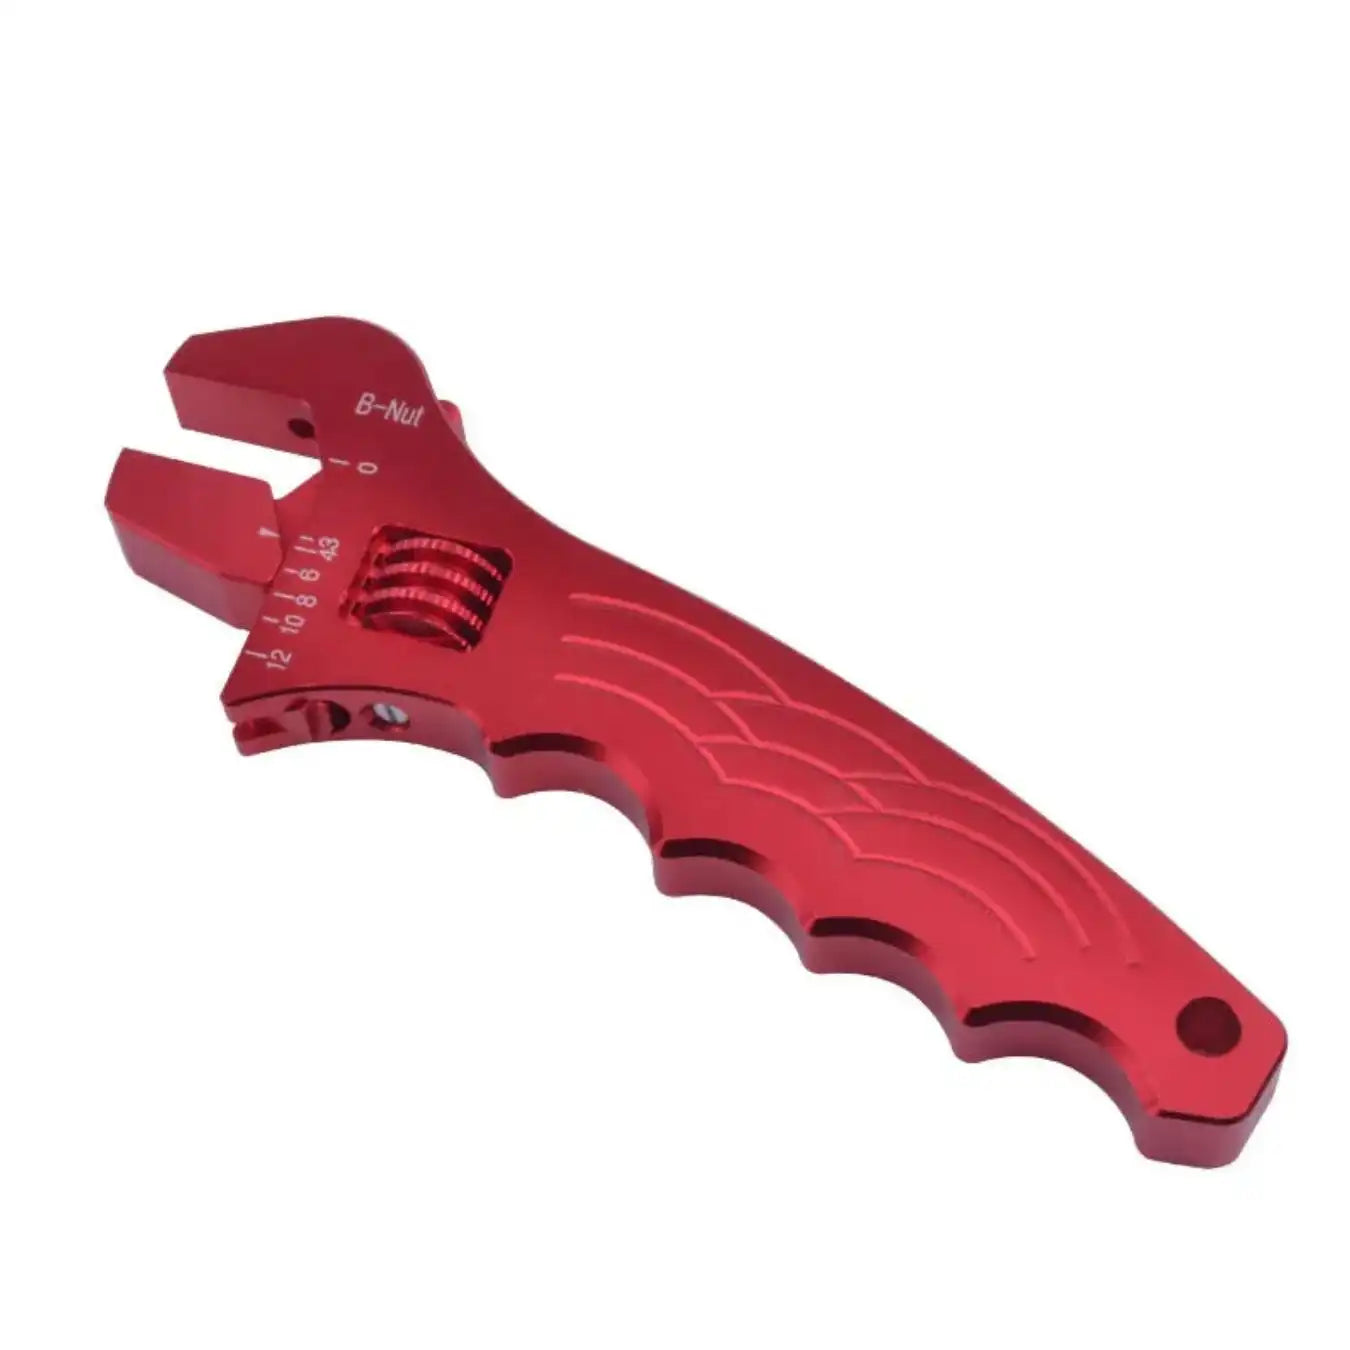 Adjustable Aluminum Lightweight Wrench Fitting Tools for AN 3- 12